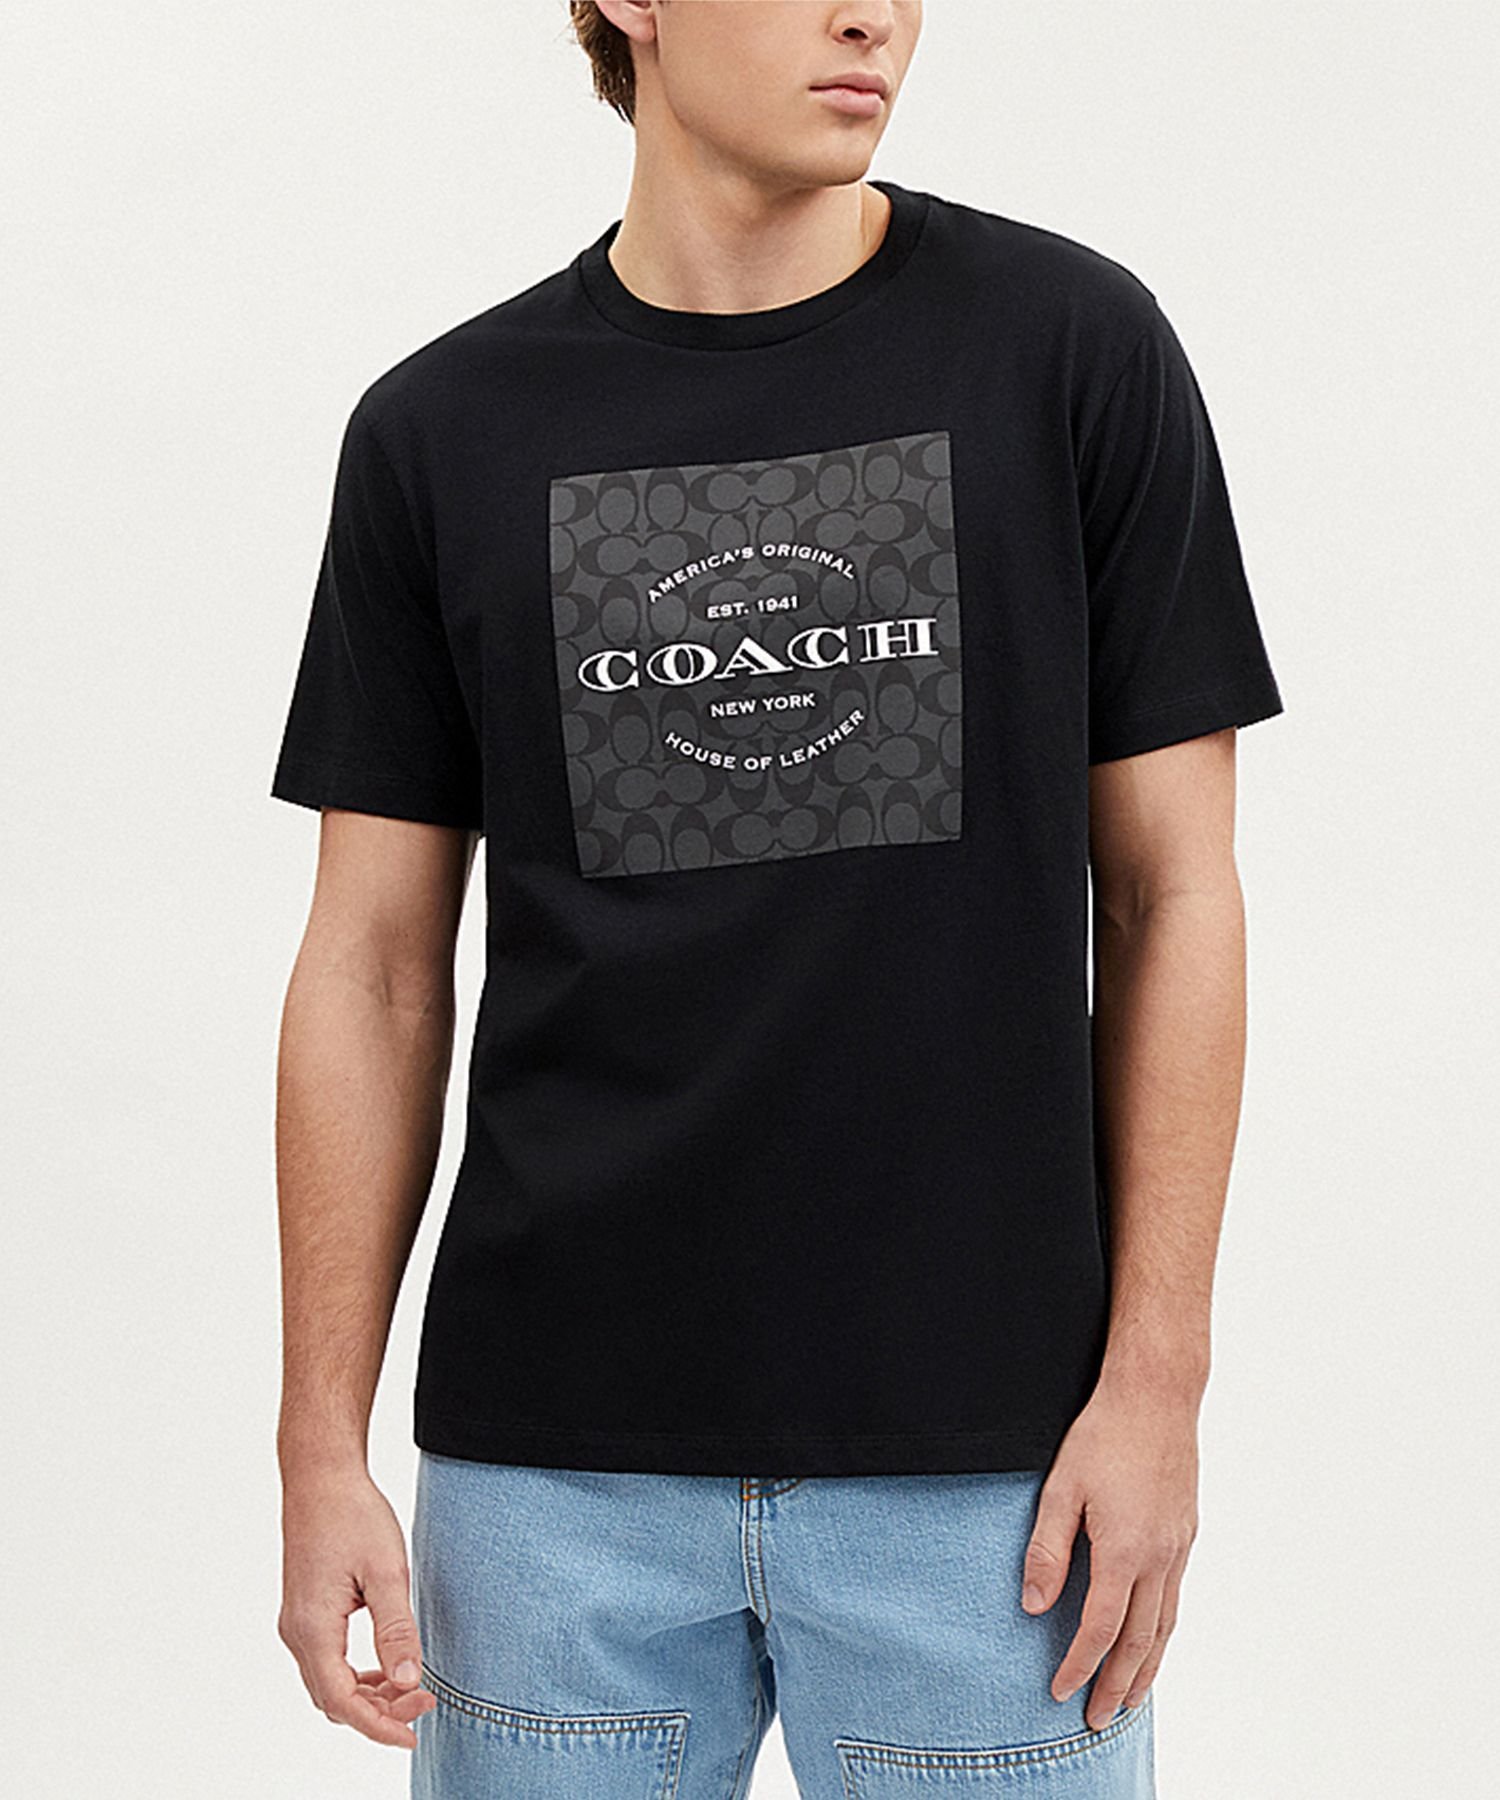 【SALE／62%OFF】COACH OUTLET シグネチャー スクエア Tシャツ コーチ　アウトレット トップス カットソー・Tシャツ ブラック【送料無料】